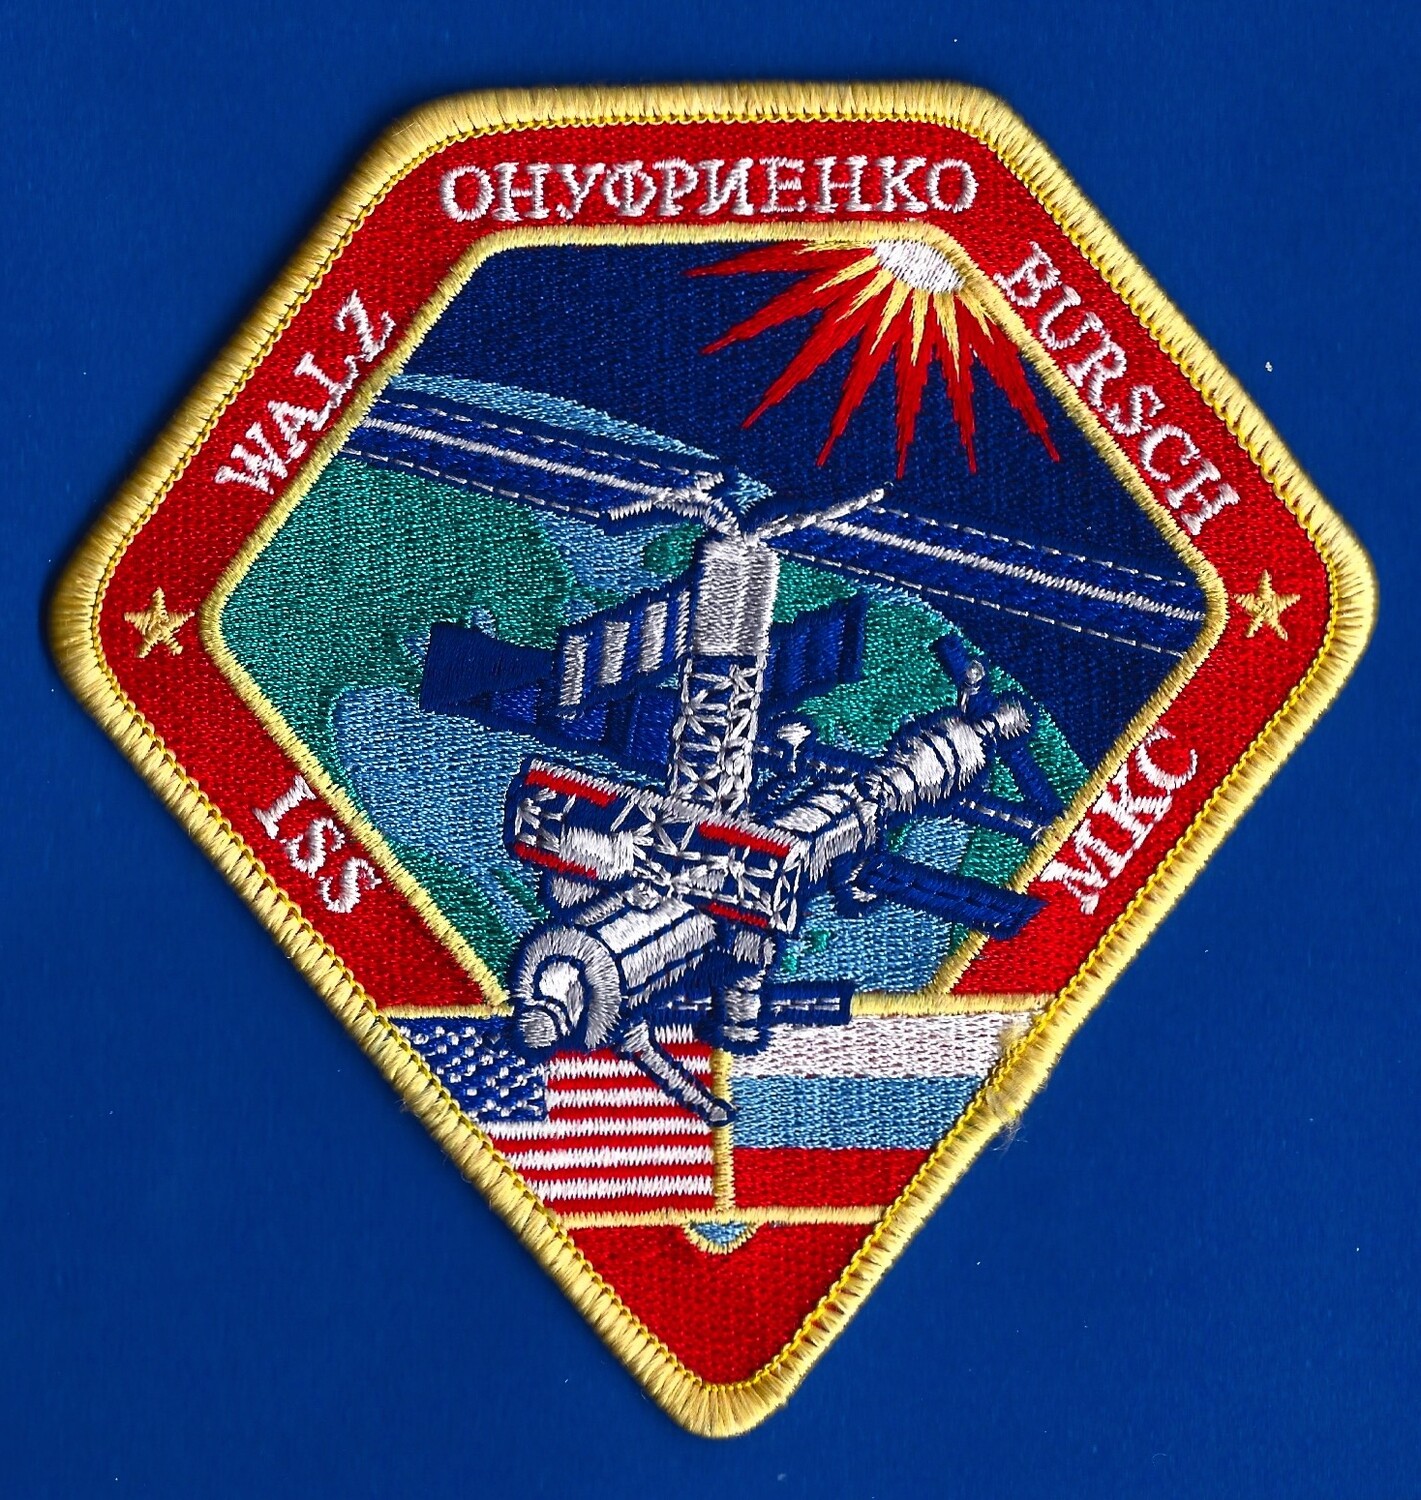 Expedition 4 Space patch